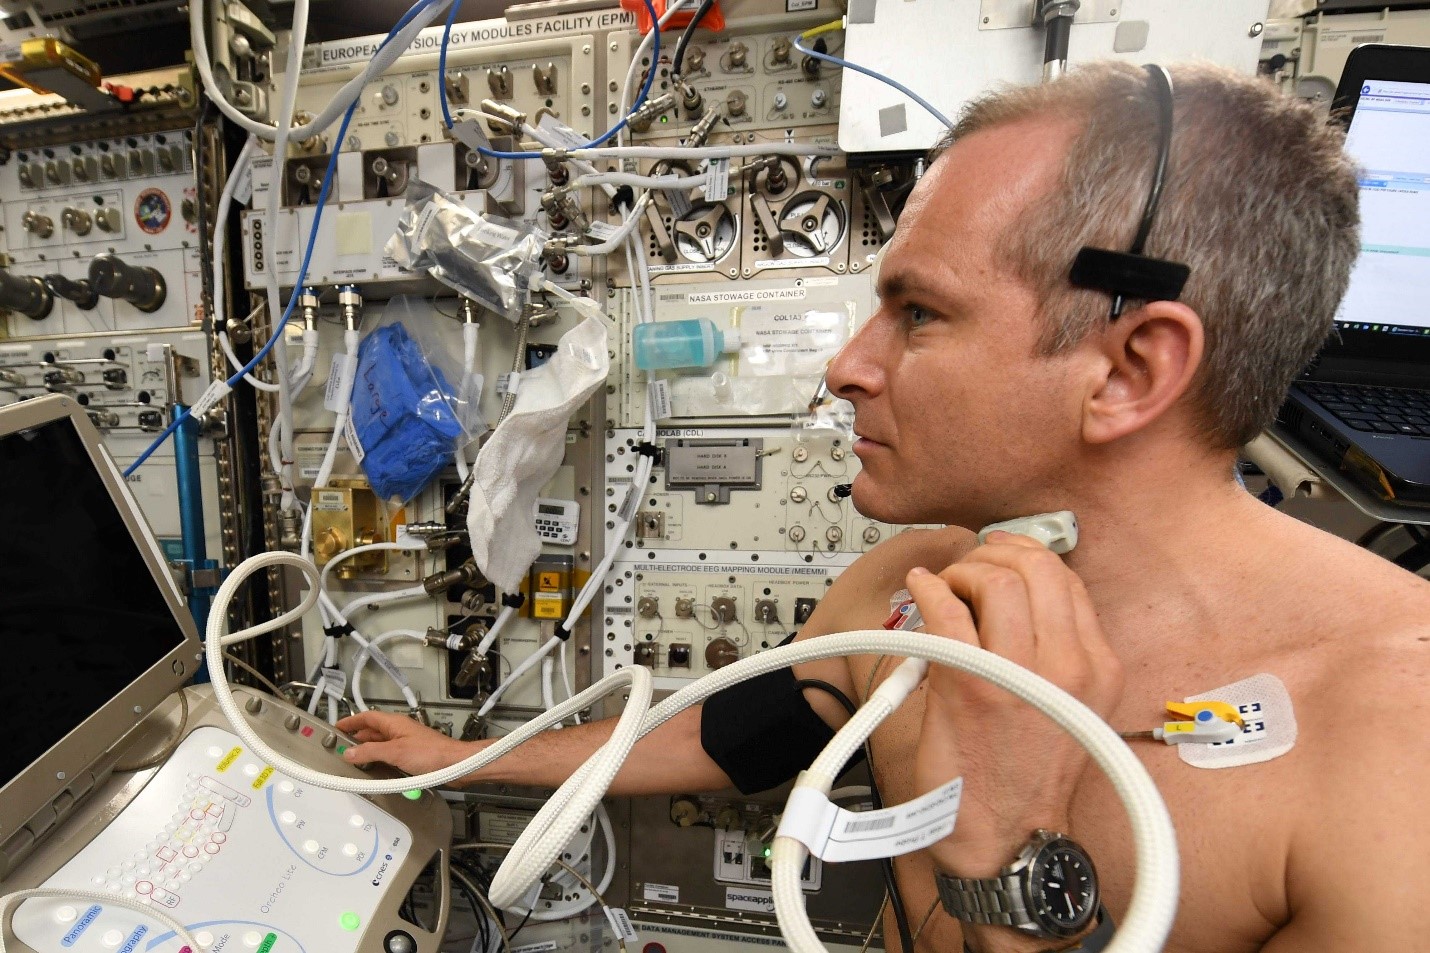 astronaut David Saint-Jacques performs an ultrasound on himself inside the space station